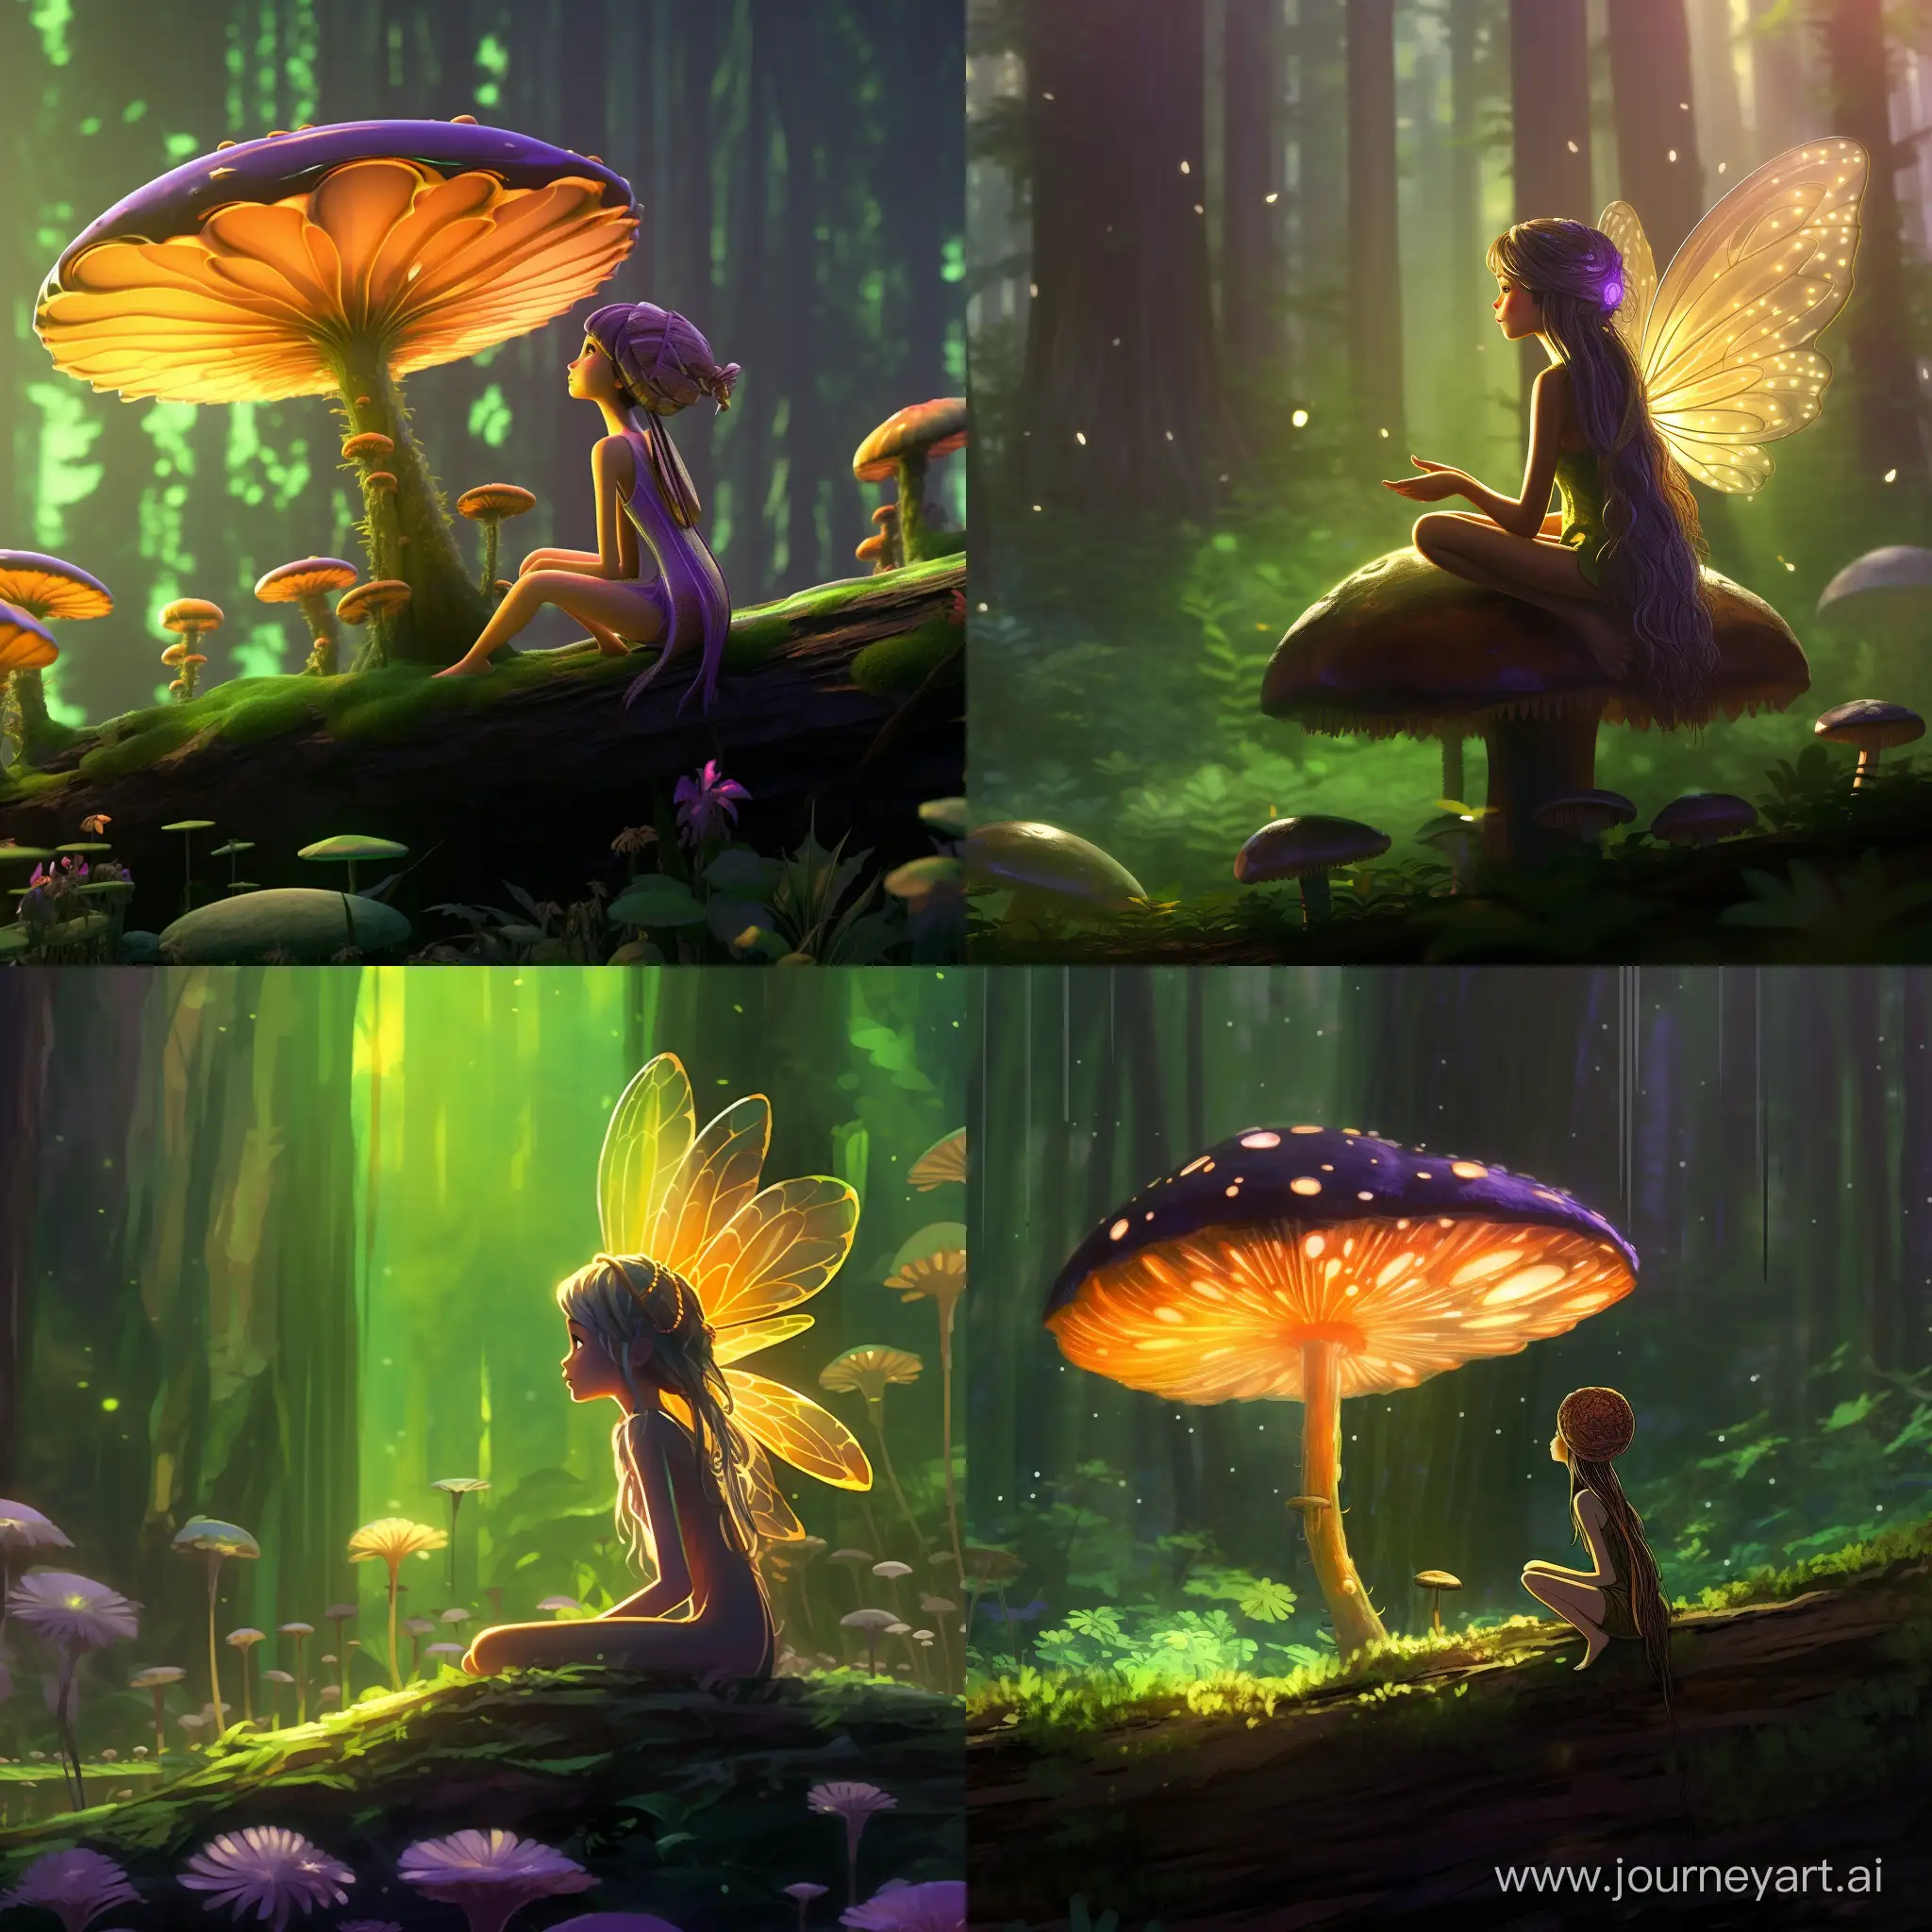 Pixar, side profile view, a beautiful young tiny green glowing elven pixie fairy girl, she has large iridescent purple wings on her back, she is lying on her front, her head in her hands, ontop of an over-sized giant magical mushroom, she is gazing up to the golden sunrays shining down on her, she is very small, lush magical green blue forest setting, depth of view, smiling, friendly, detailed, magical, sharp focus, no blur, cinematic, view from a distance, soft lighting, fairytale, in the style Pixar Fairytale